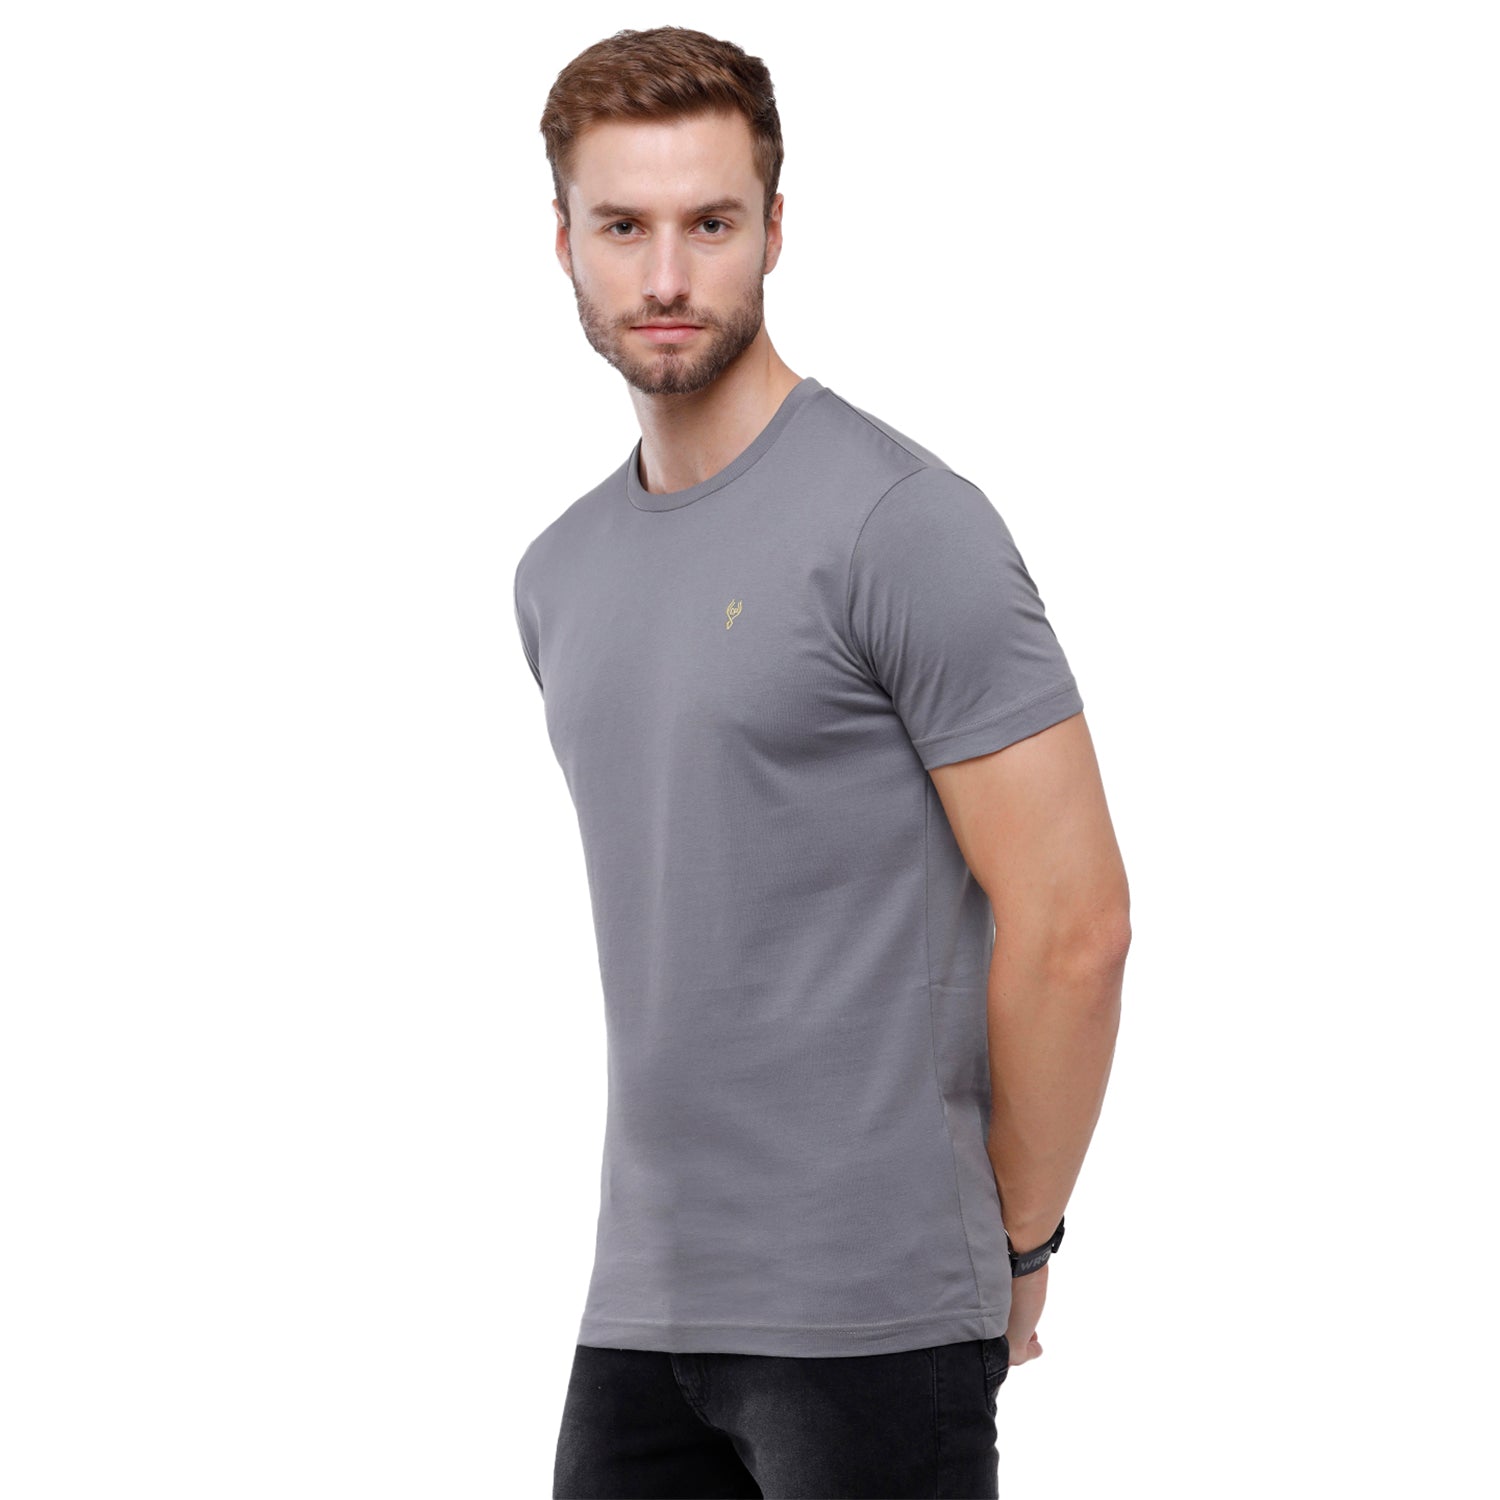 Classic Polo Men's Solid Single Jersey Grey Half Sleeve Slim Fit T-Shirt - Kore-03 T-shirt Classic Polo 